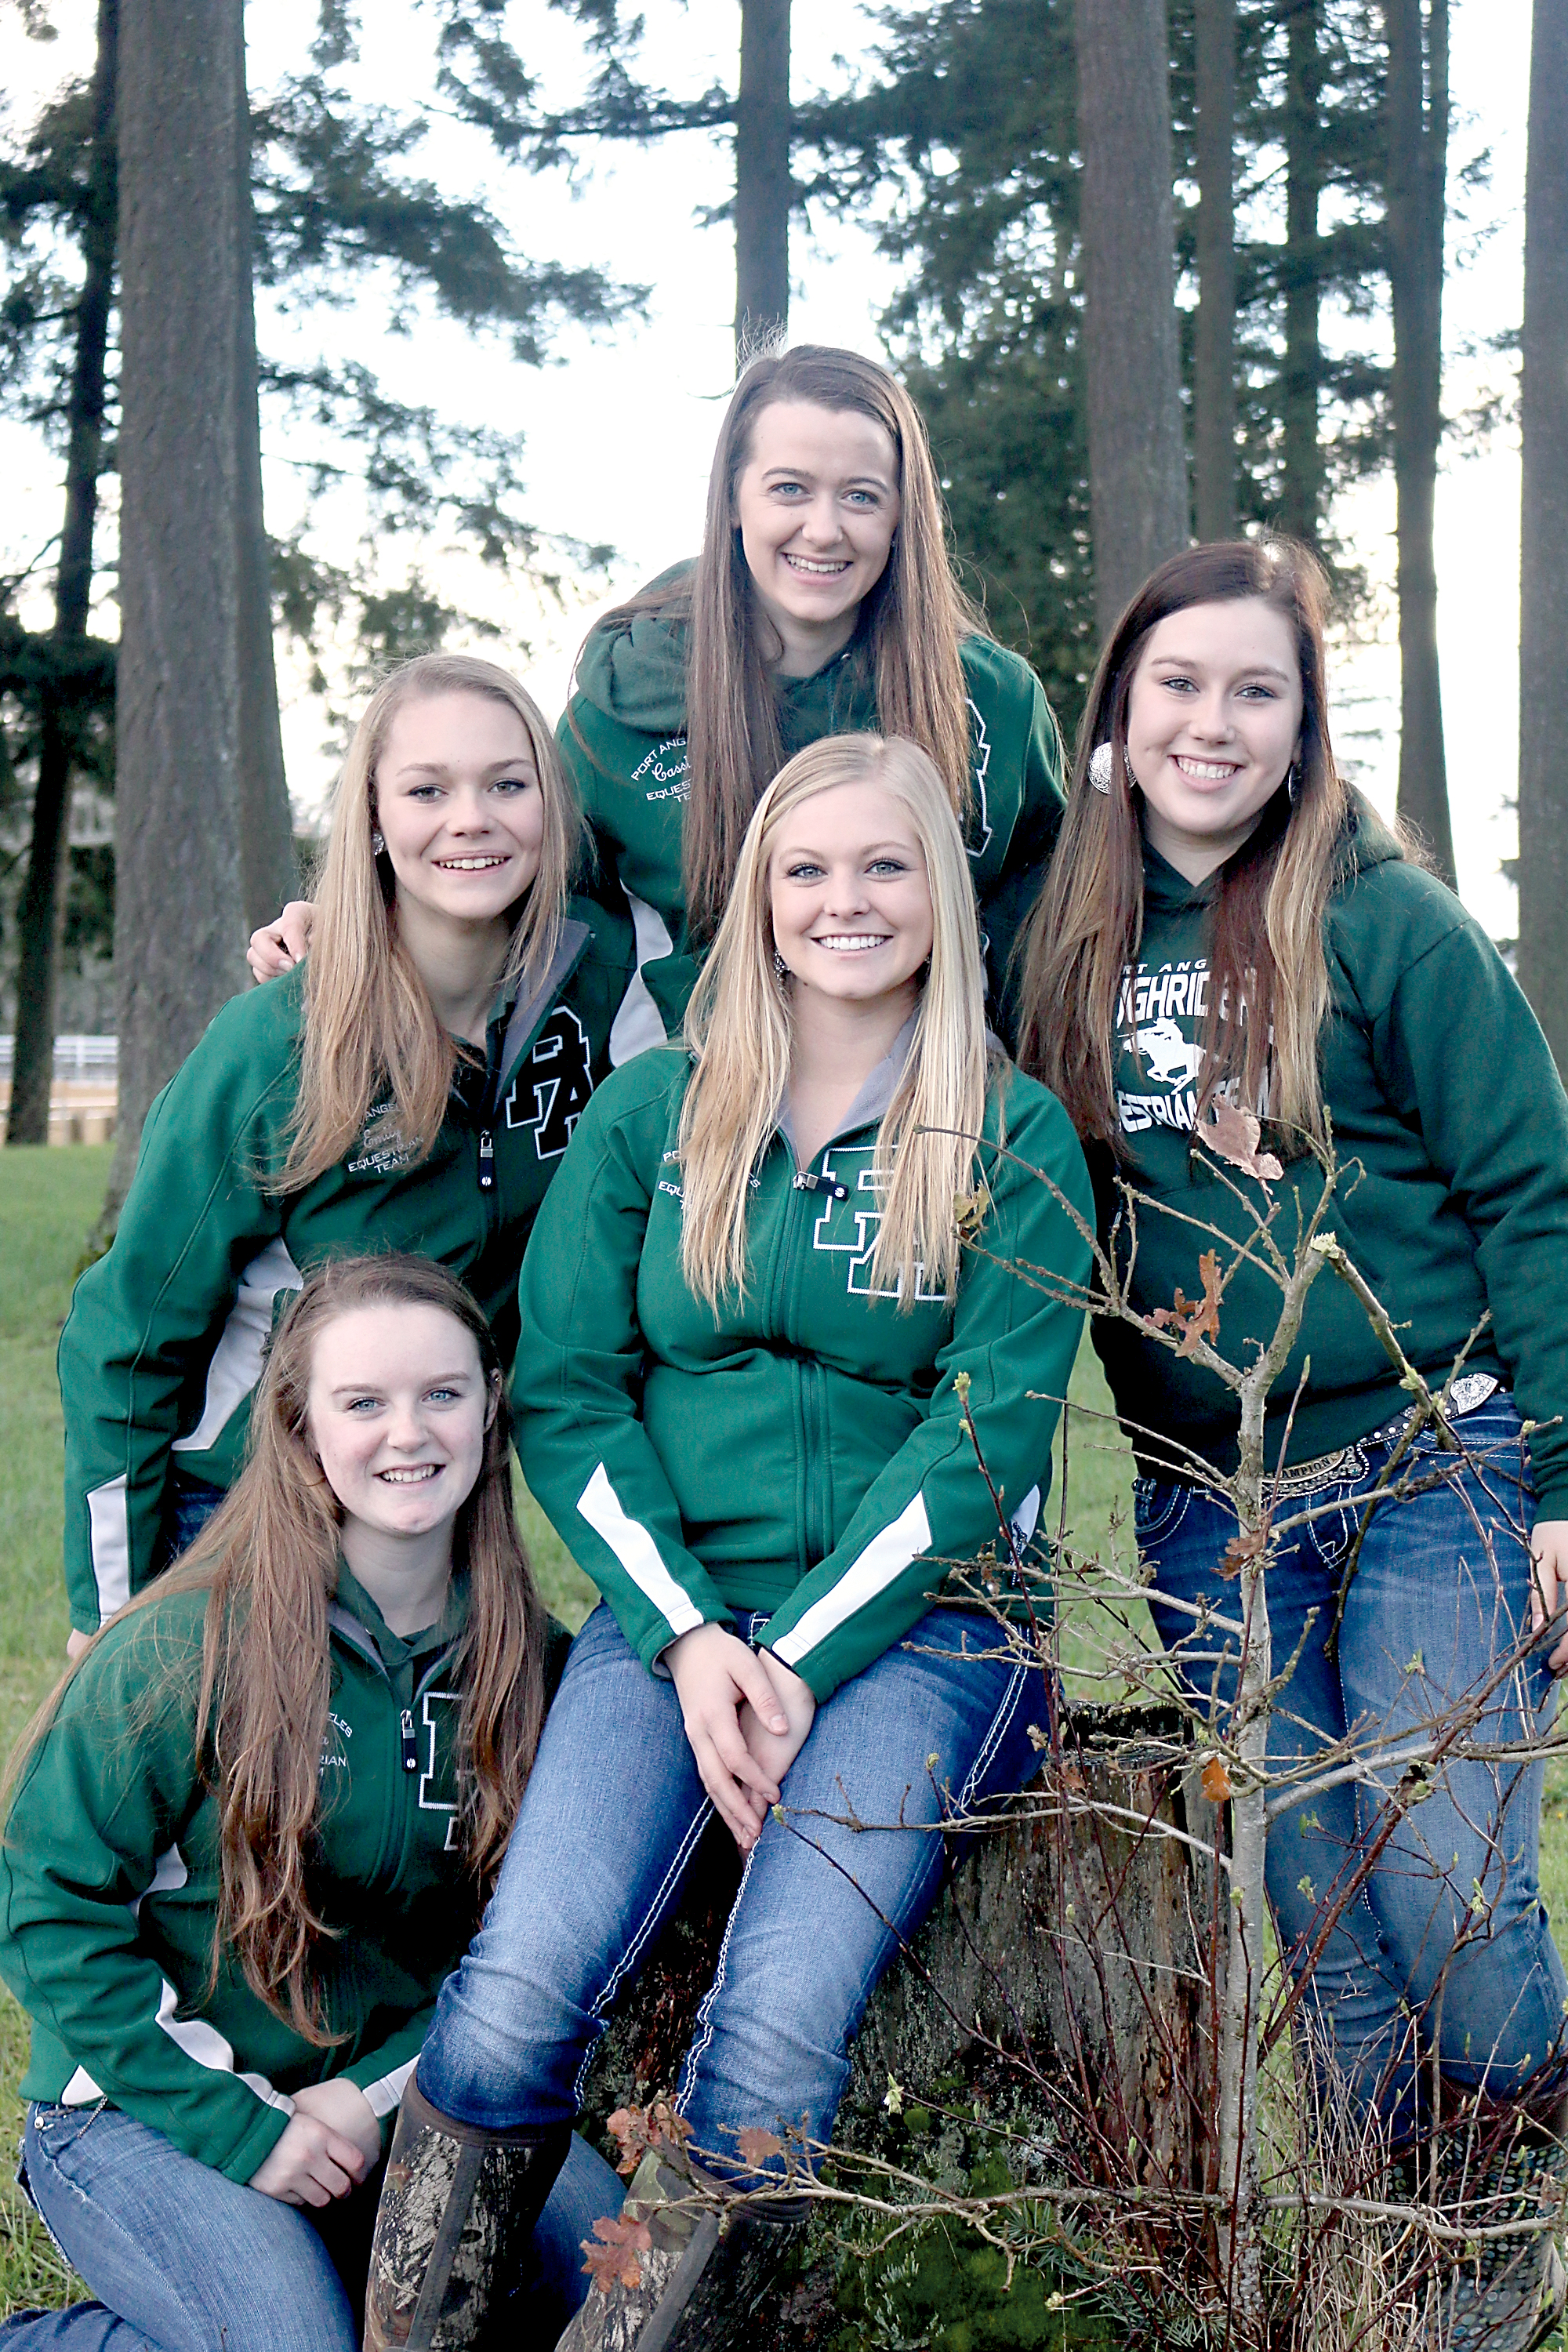 The Port Angeles High School equestrian team is made up of